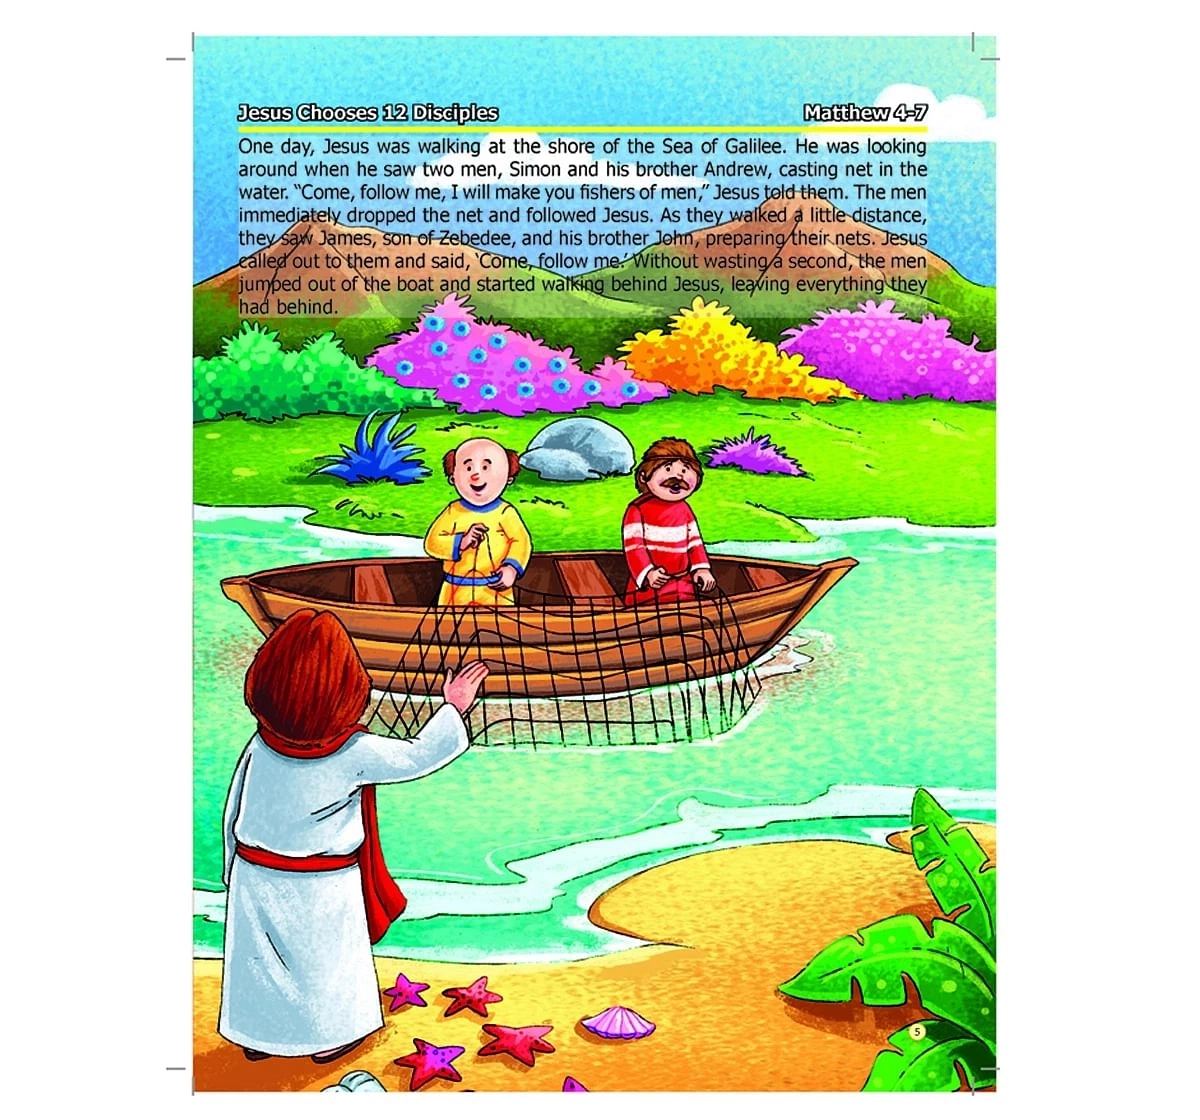 Dreamland Paper Back Bible Old Testament Story Books for kids 5Y+, Multicolour